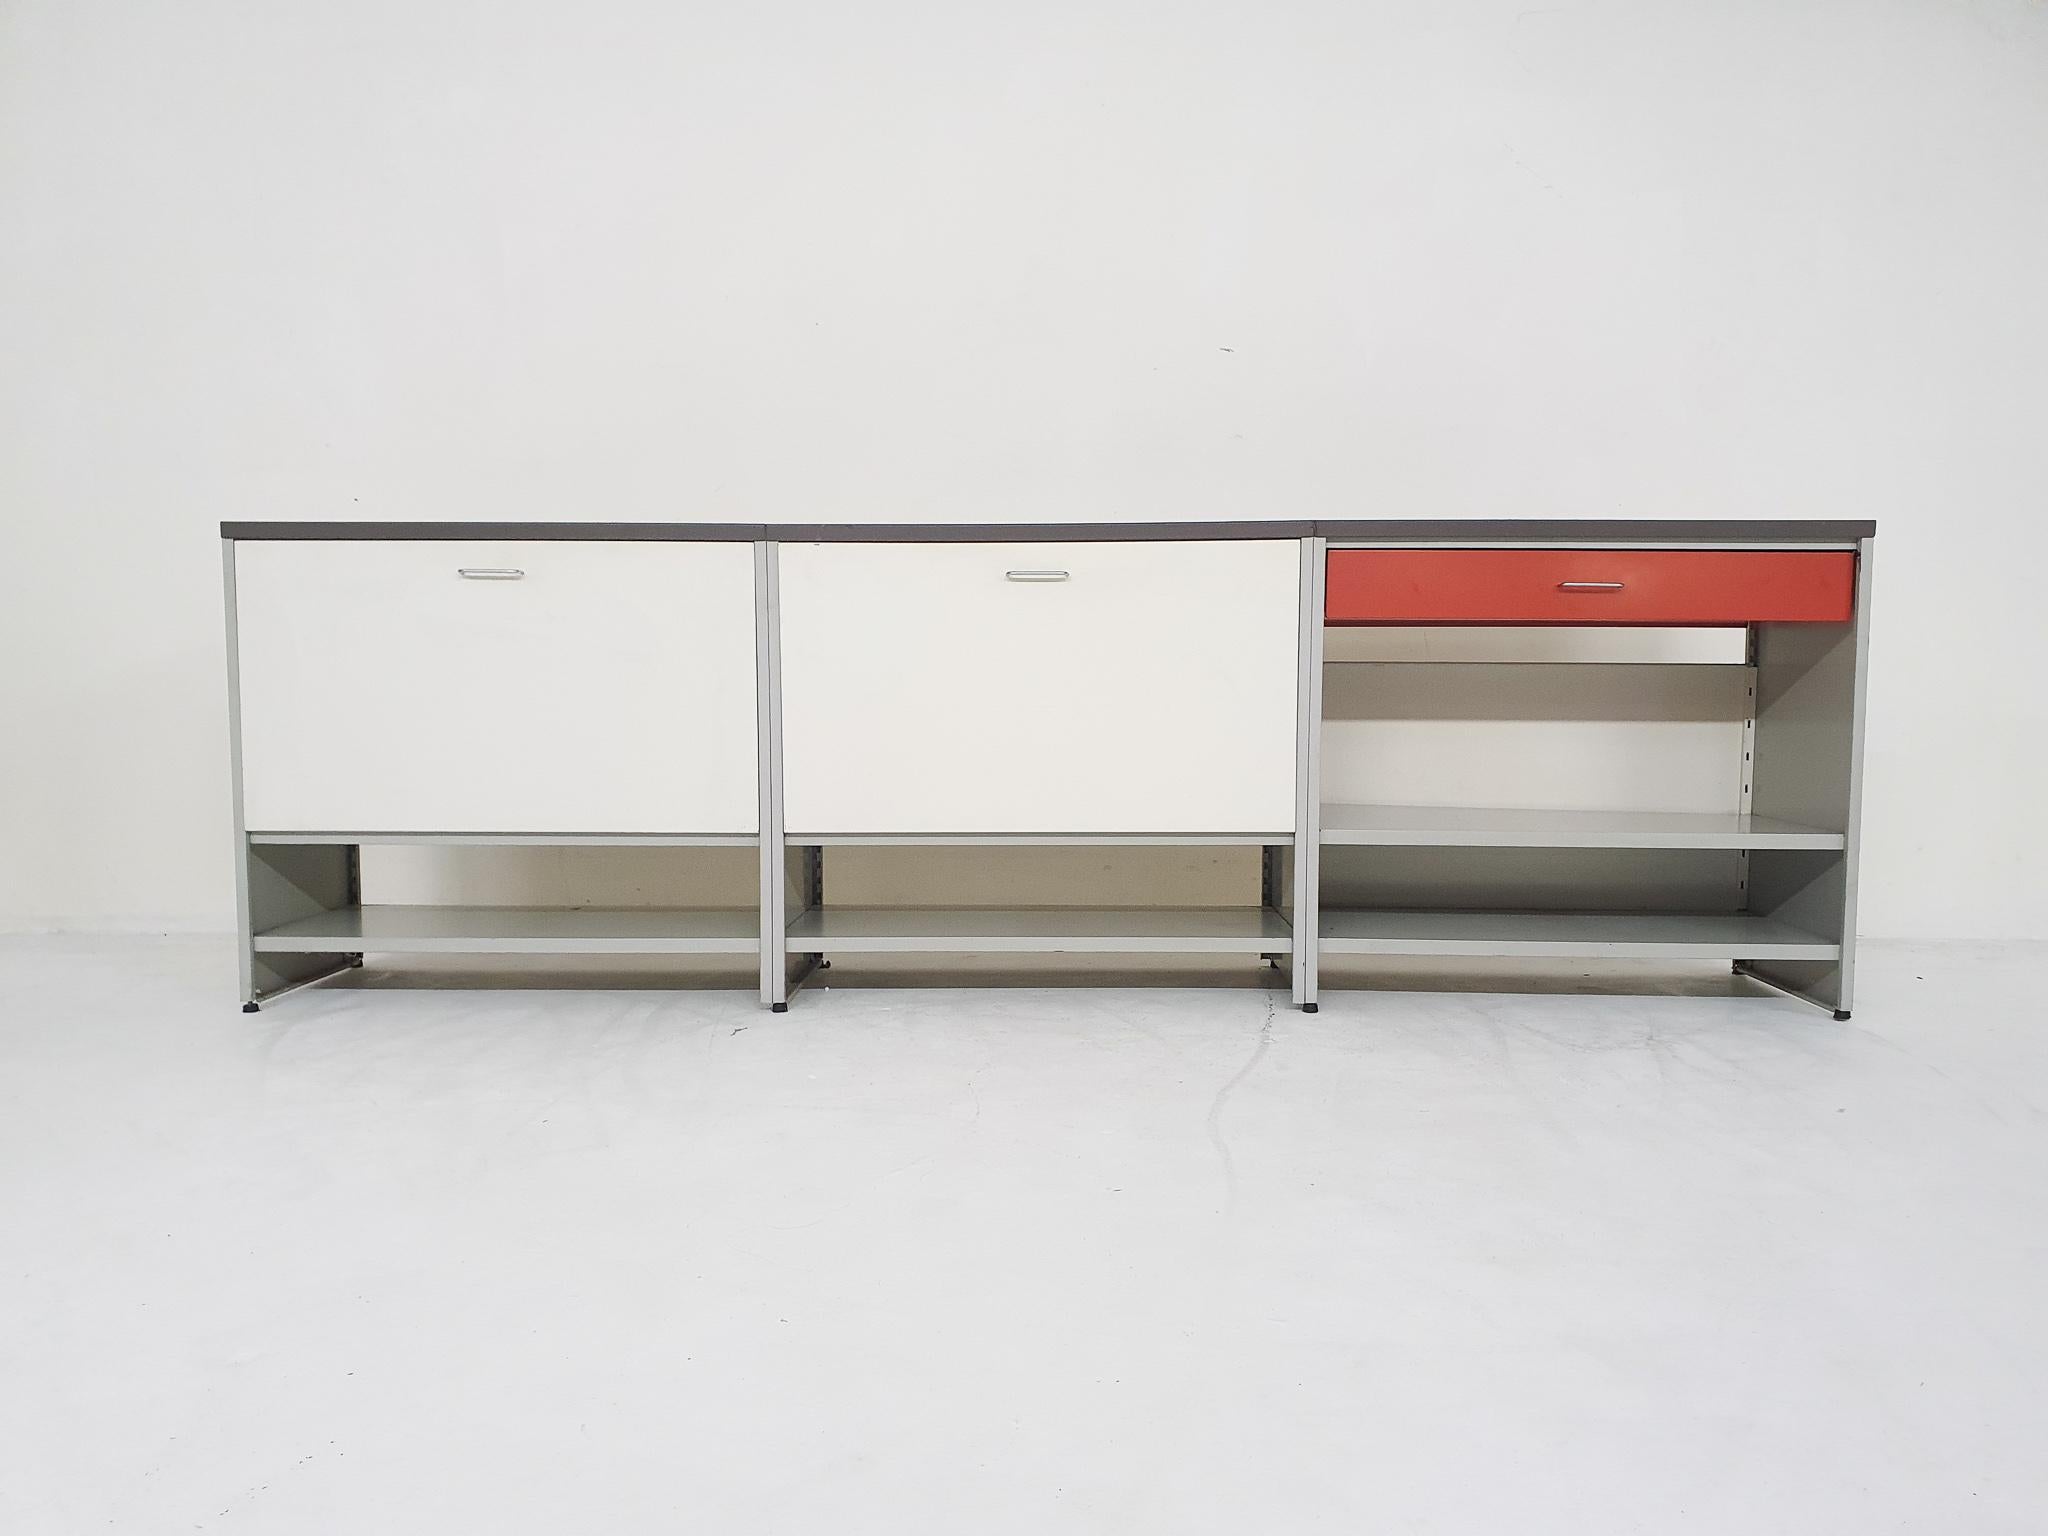 A.R. Cordemeyer for Gispen sideboard model 5600, The Netherlands, 1950’s

Metal credenza with two valves and a red drawer.
The top has a brown faux leather cover.
Traces of use consistent with age and time.

A R Cordemeyer
André Cordemeyer, was a